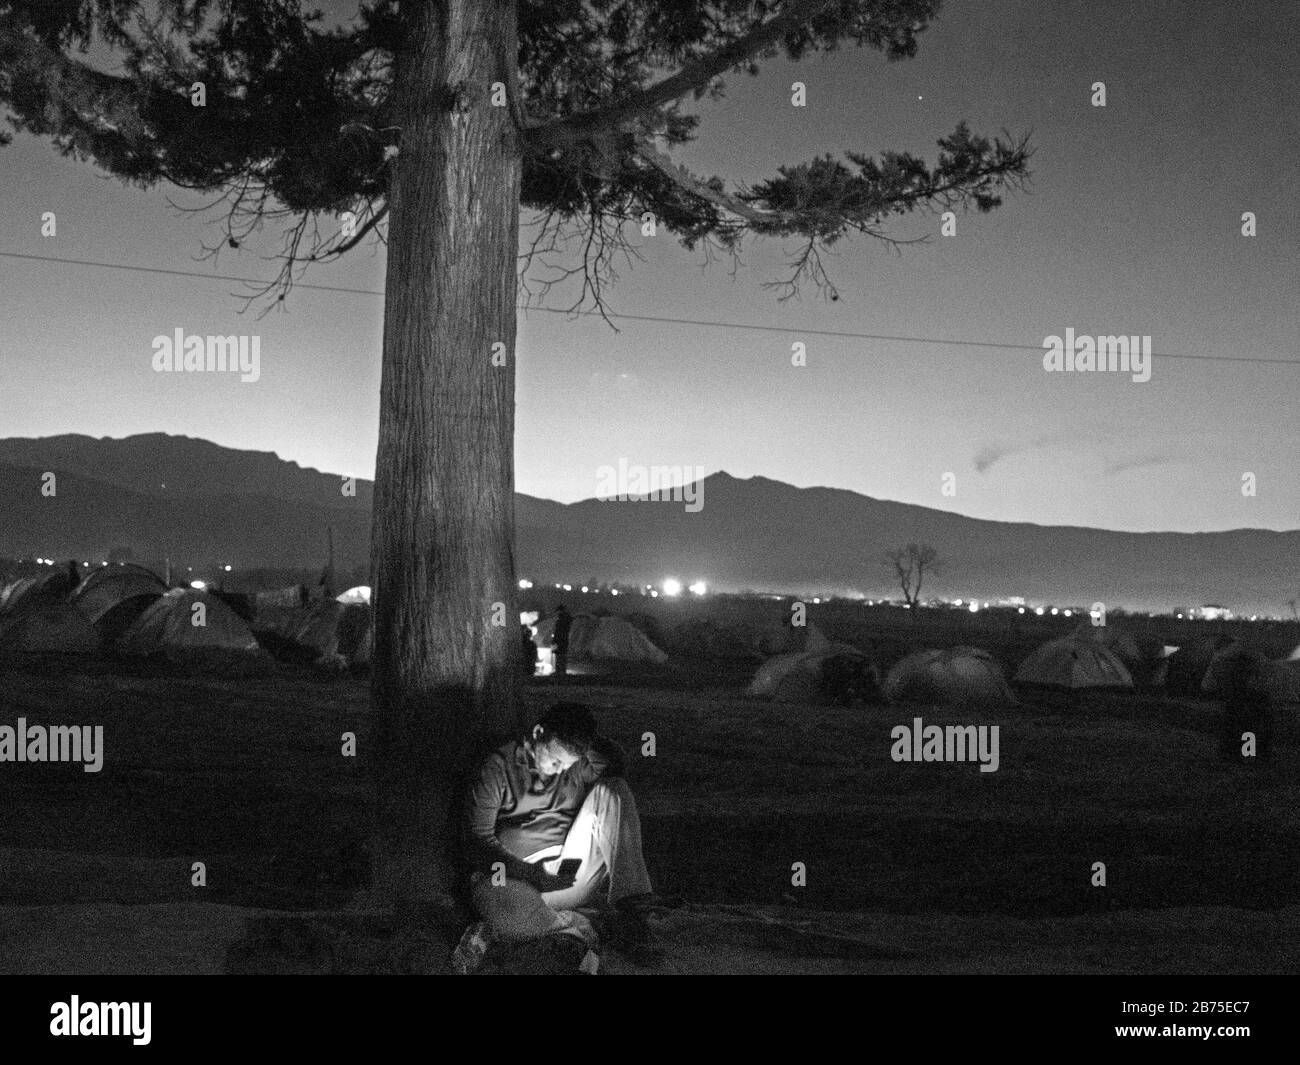 Refugee camp in Idomeni on the border with Macedonia. A man is sitting under a tree at dusk with his mobile phone. [automated translation] Stock Photo